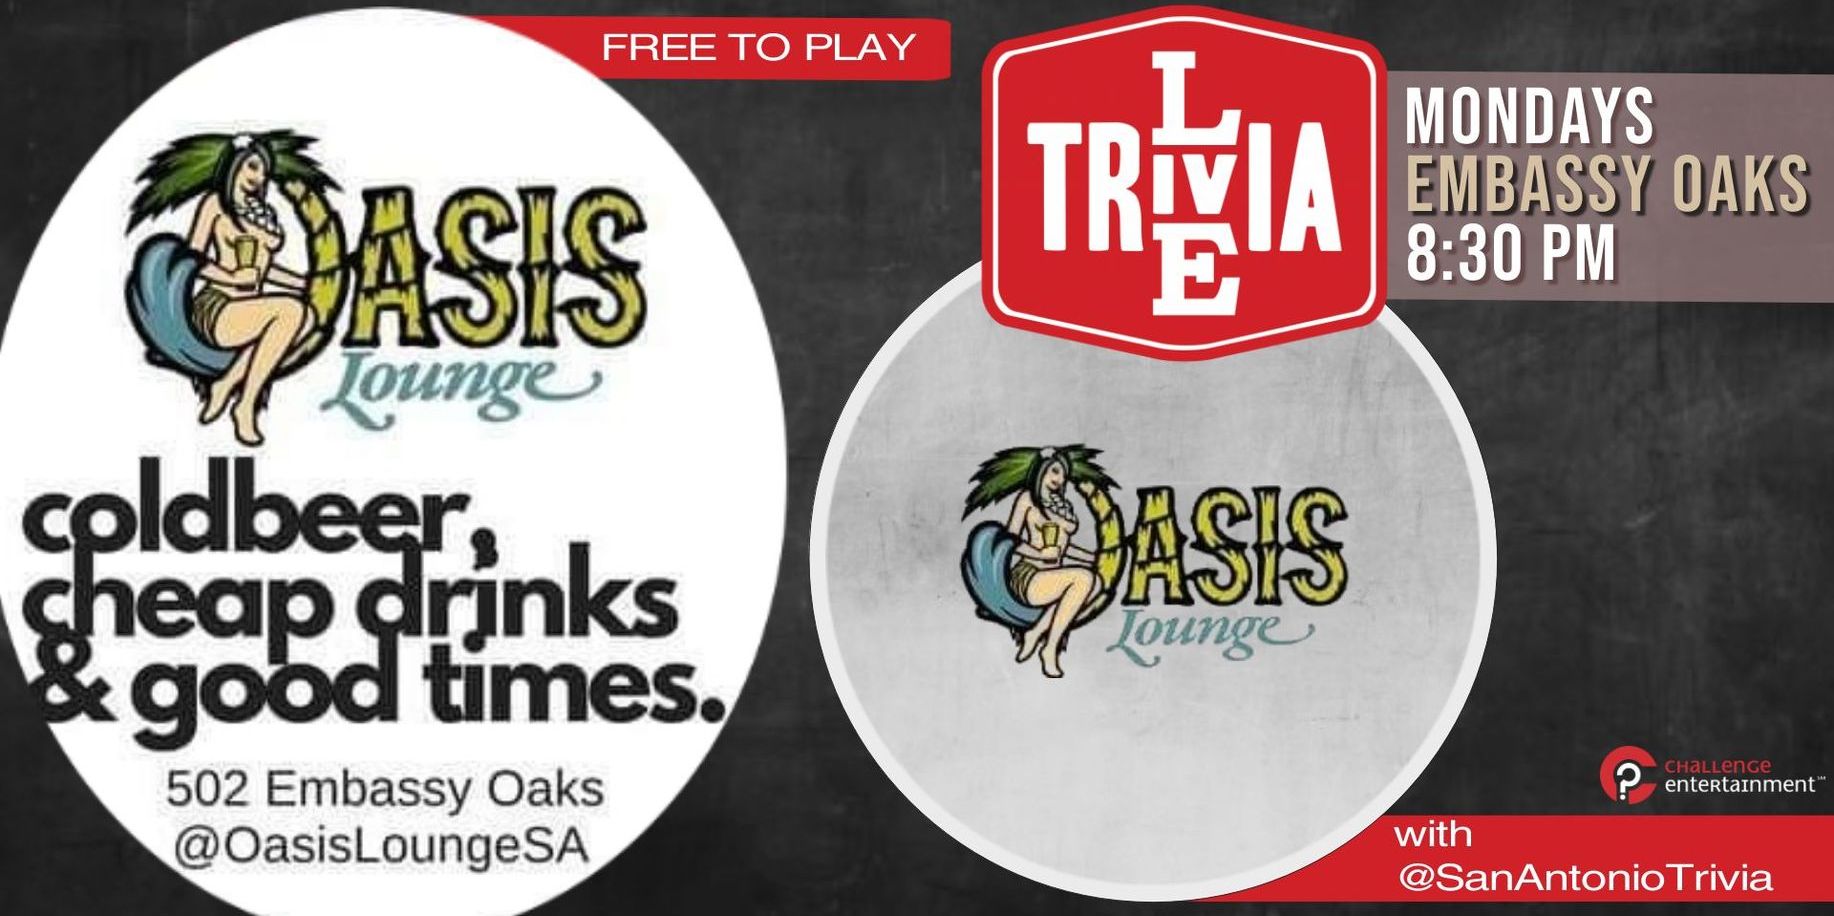 Live Trivia at Oasis Lounge promotional image